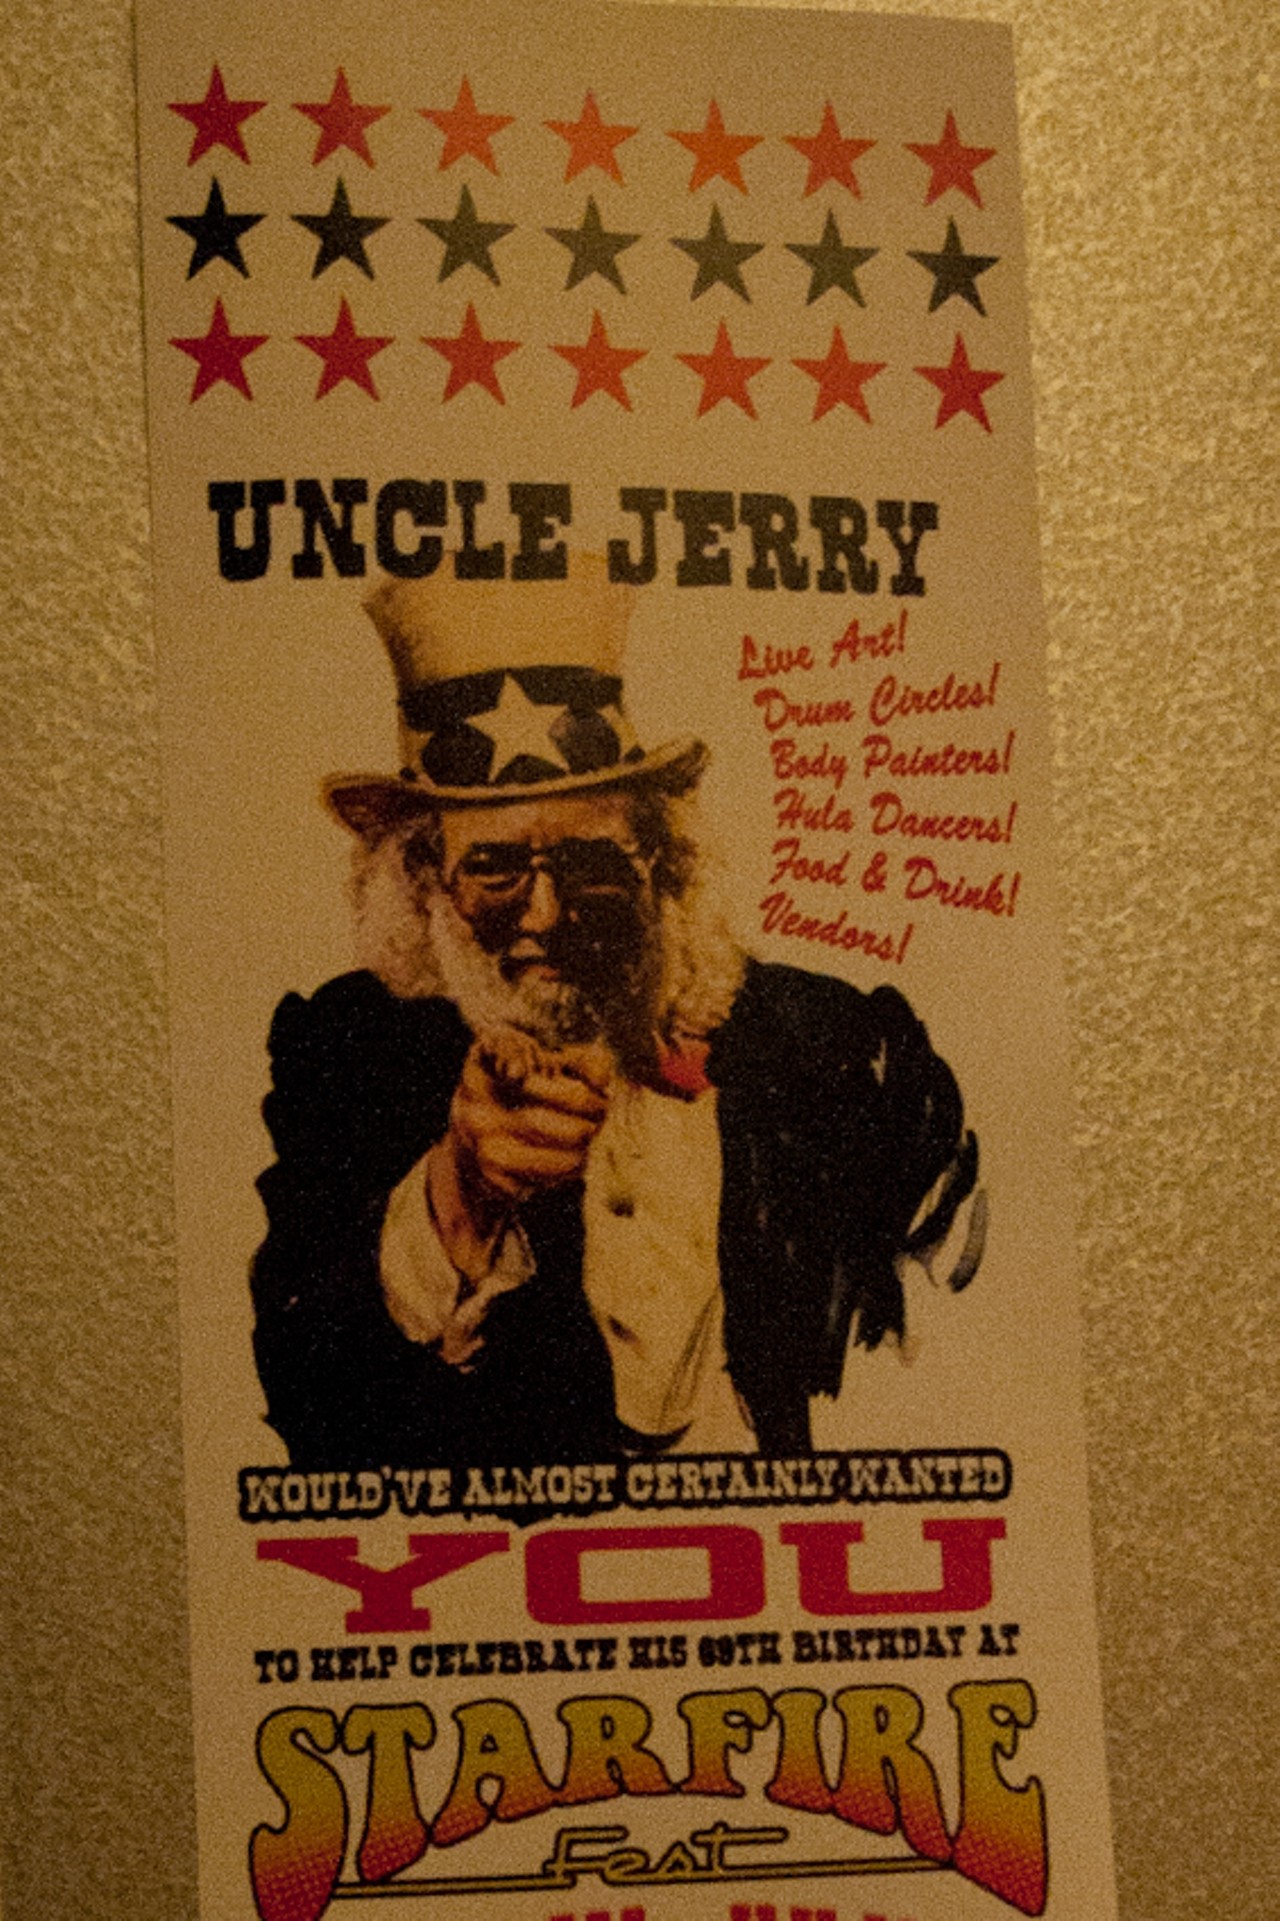 Uncle Jerry Wants You!